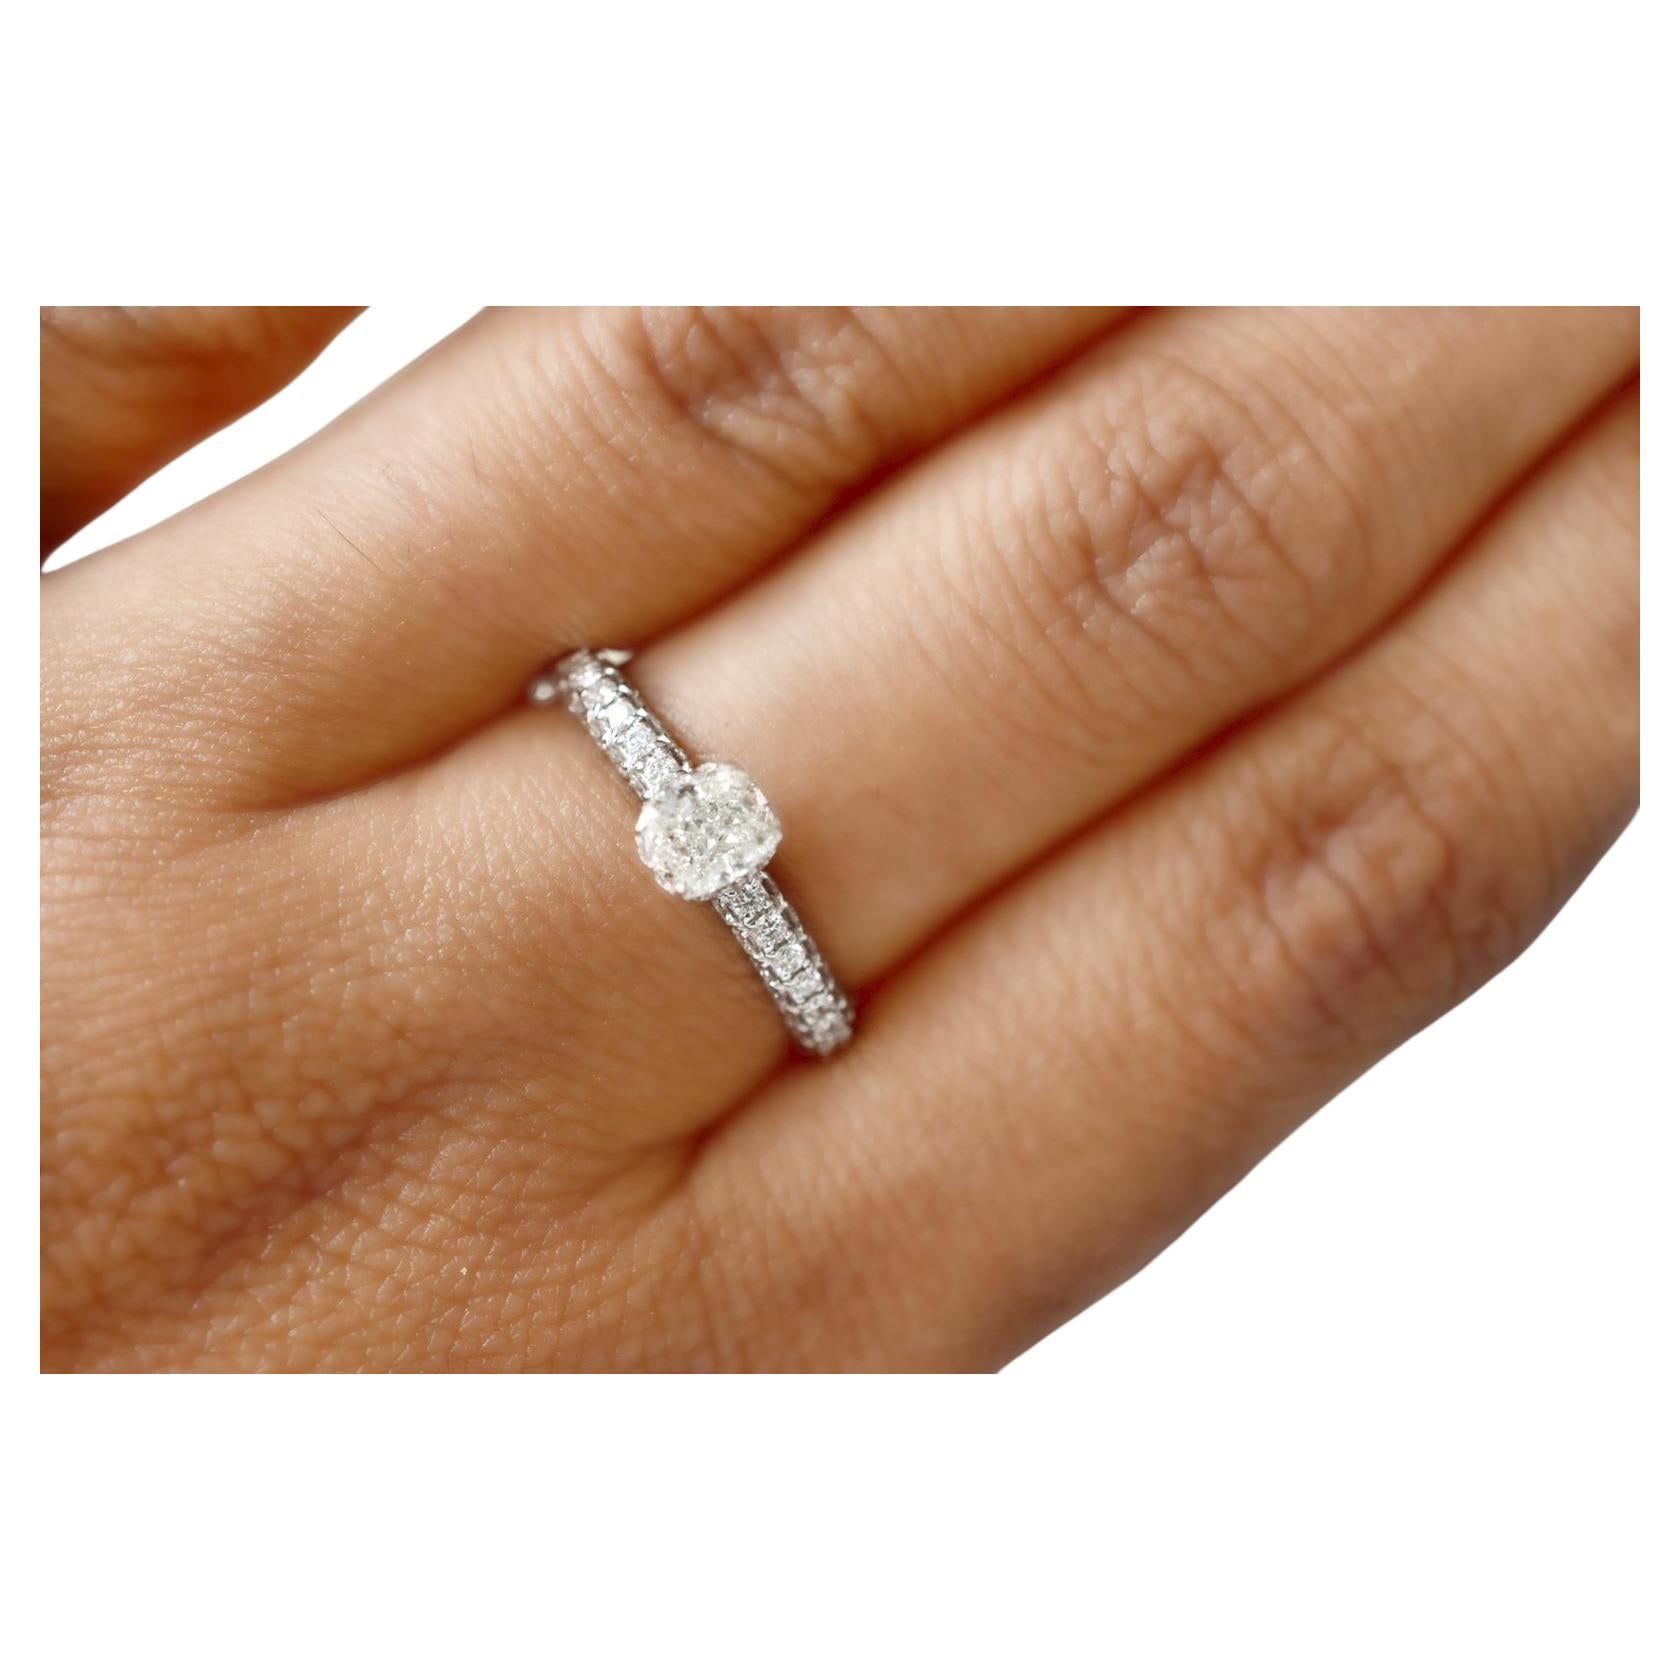 GIA Certified 0.51 Carat White Diamond Ring VVS1 Clarity For Sale